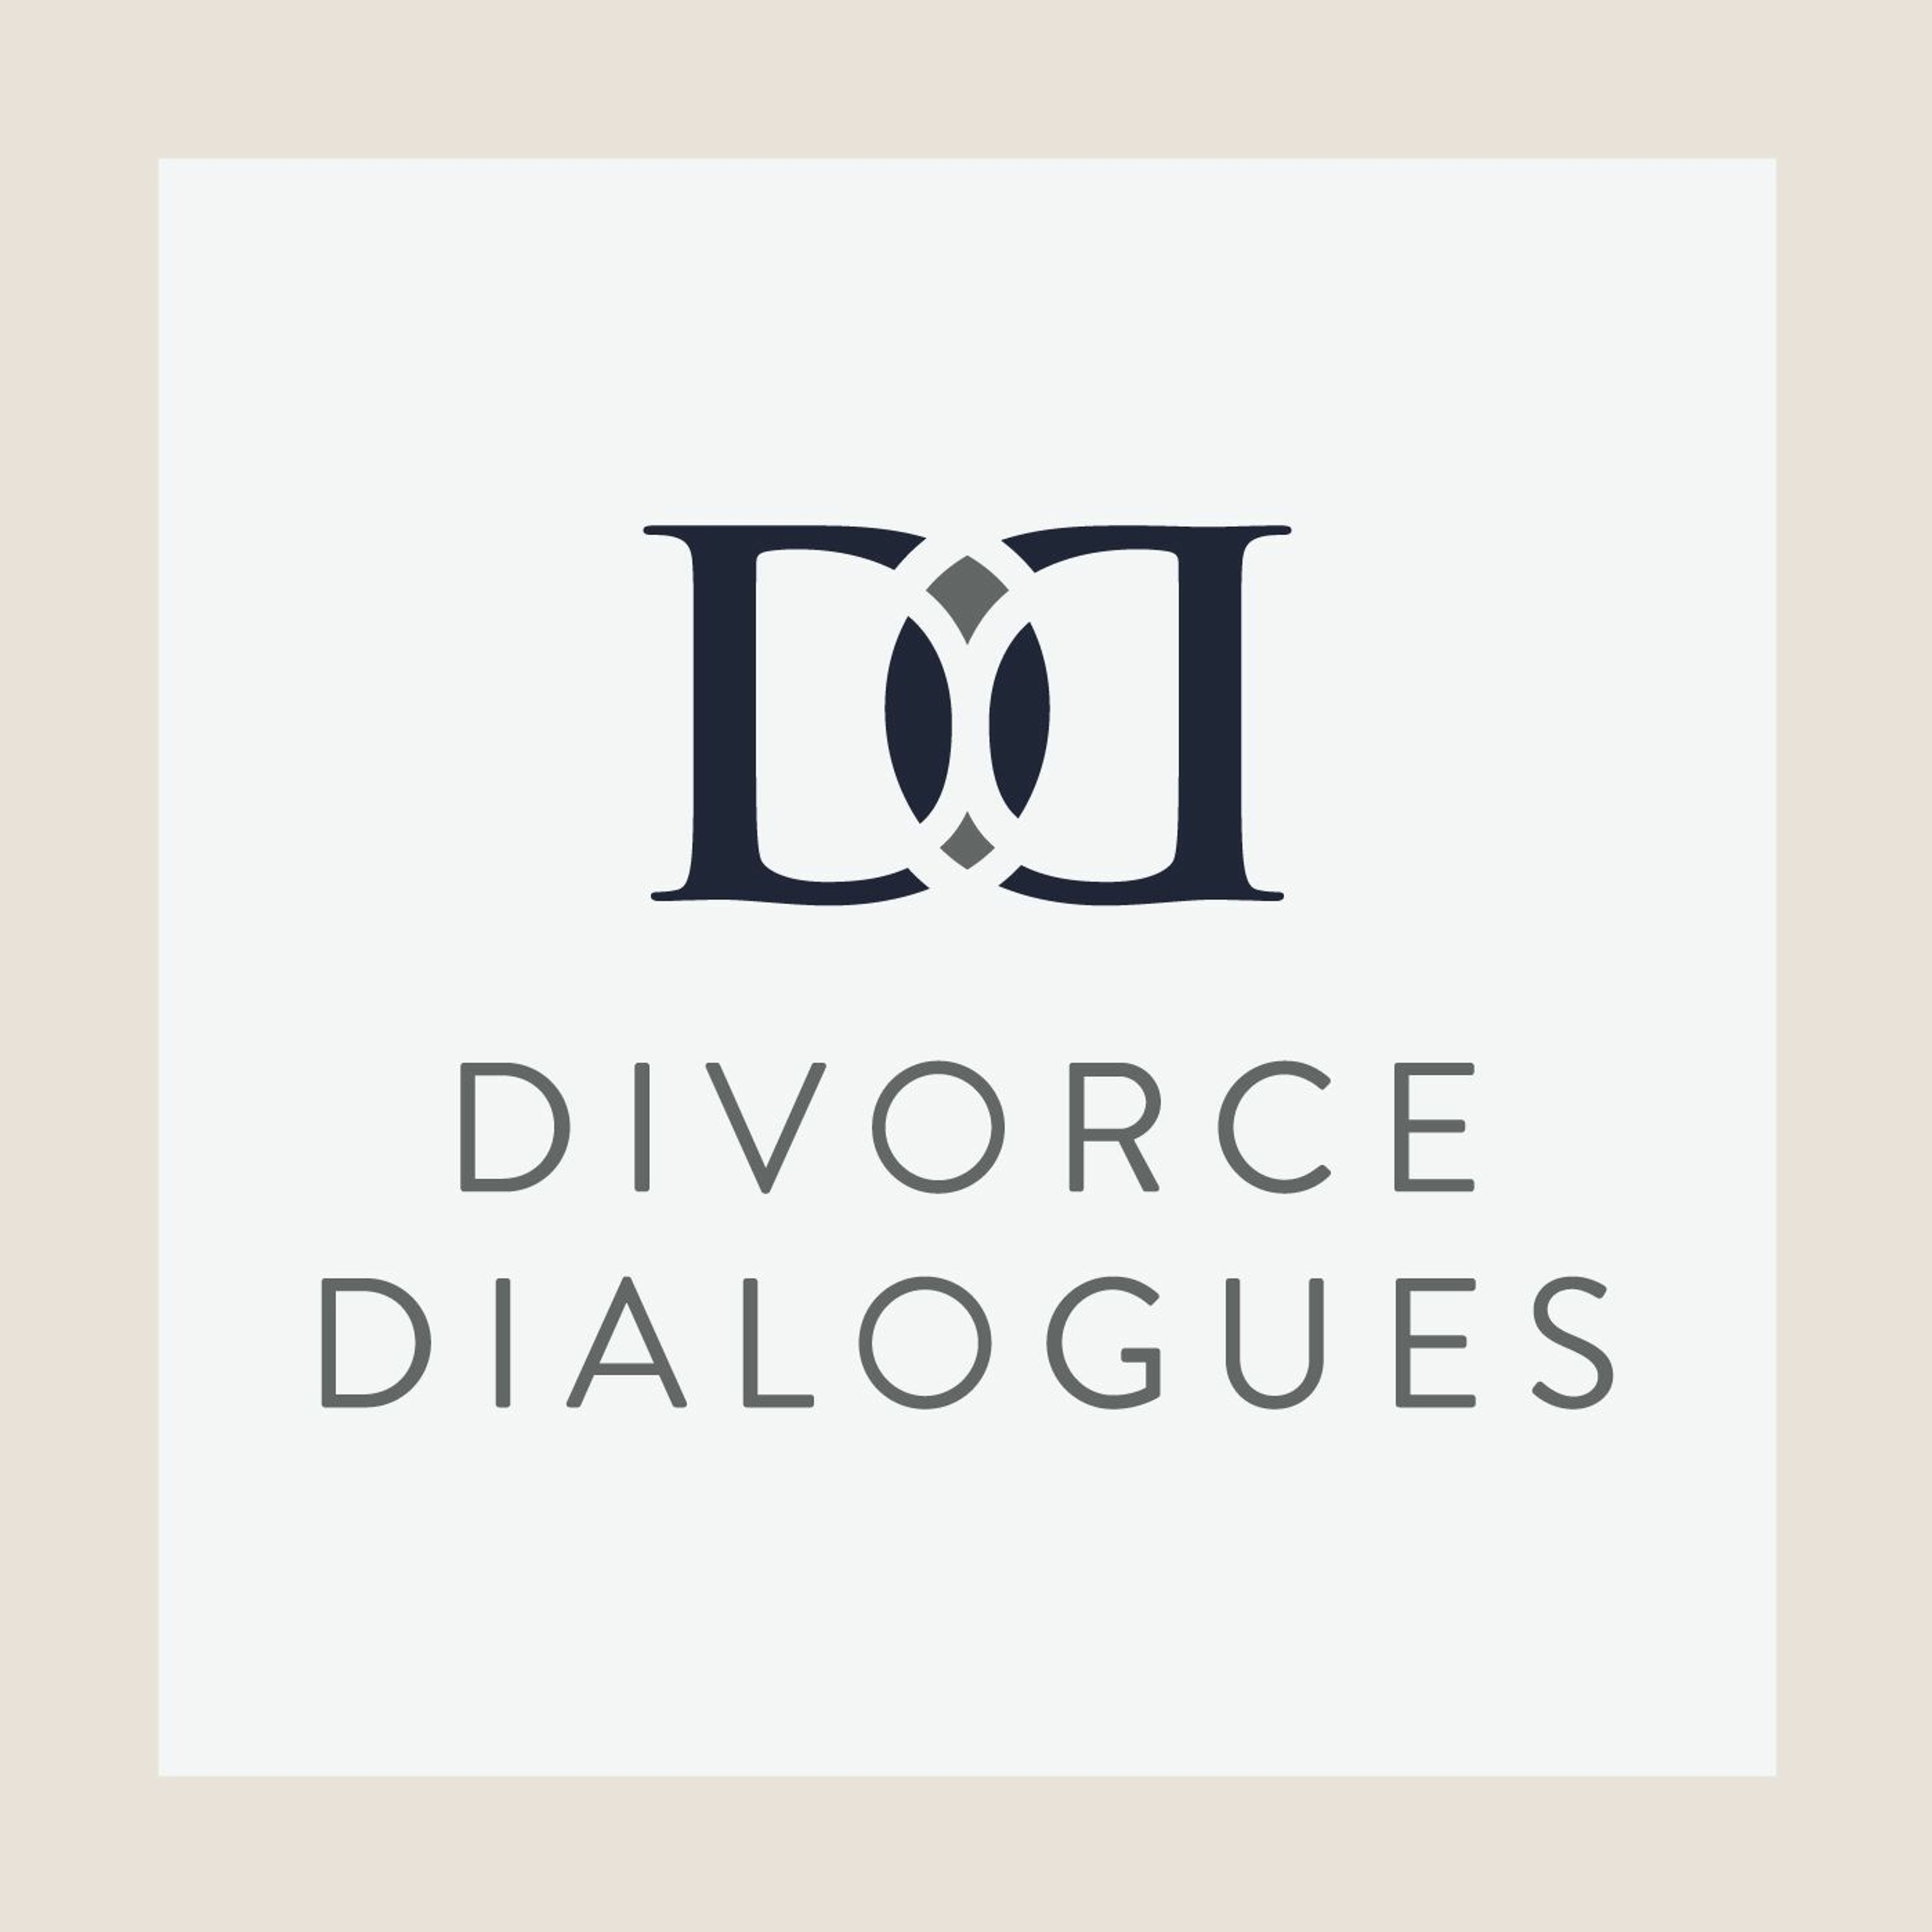 Divorce Dialogues - 5 Things You Need to Know to Survive Divorce With Ilyssa Panitz